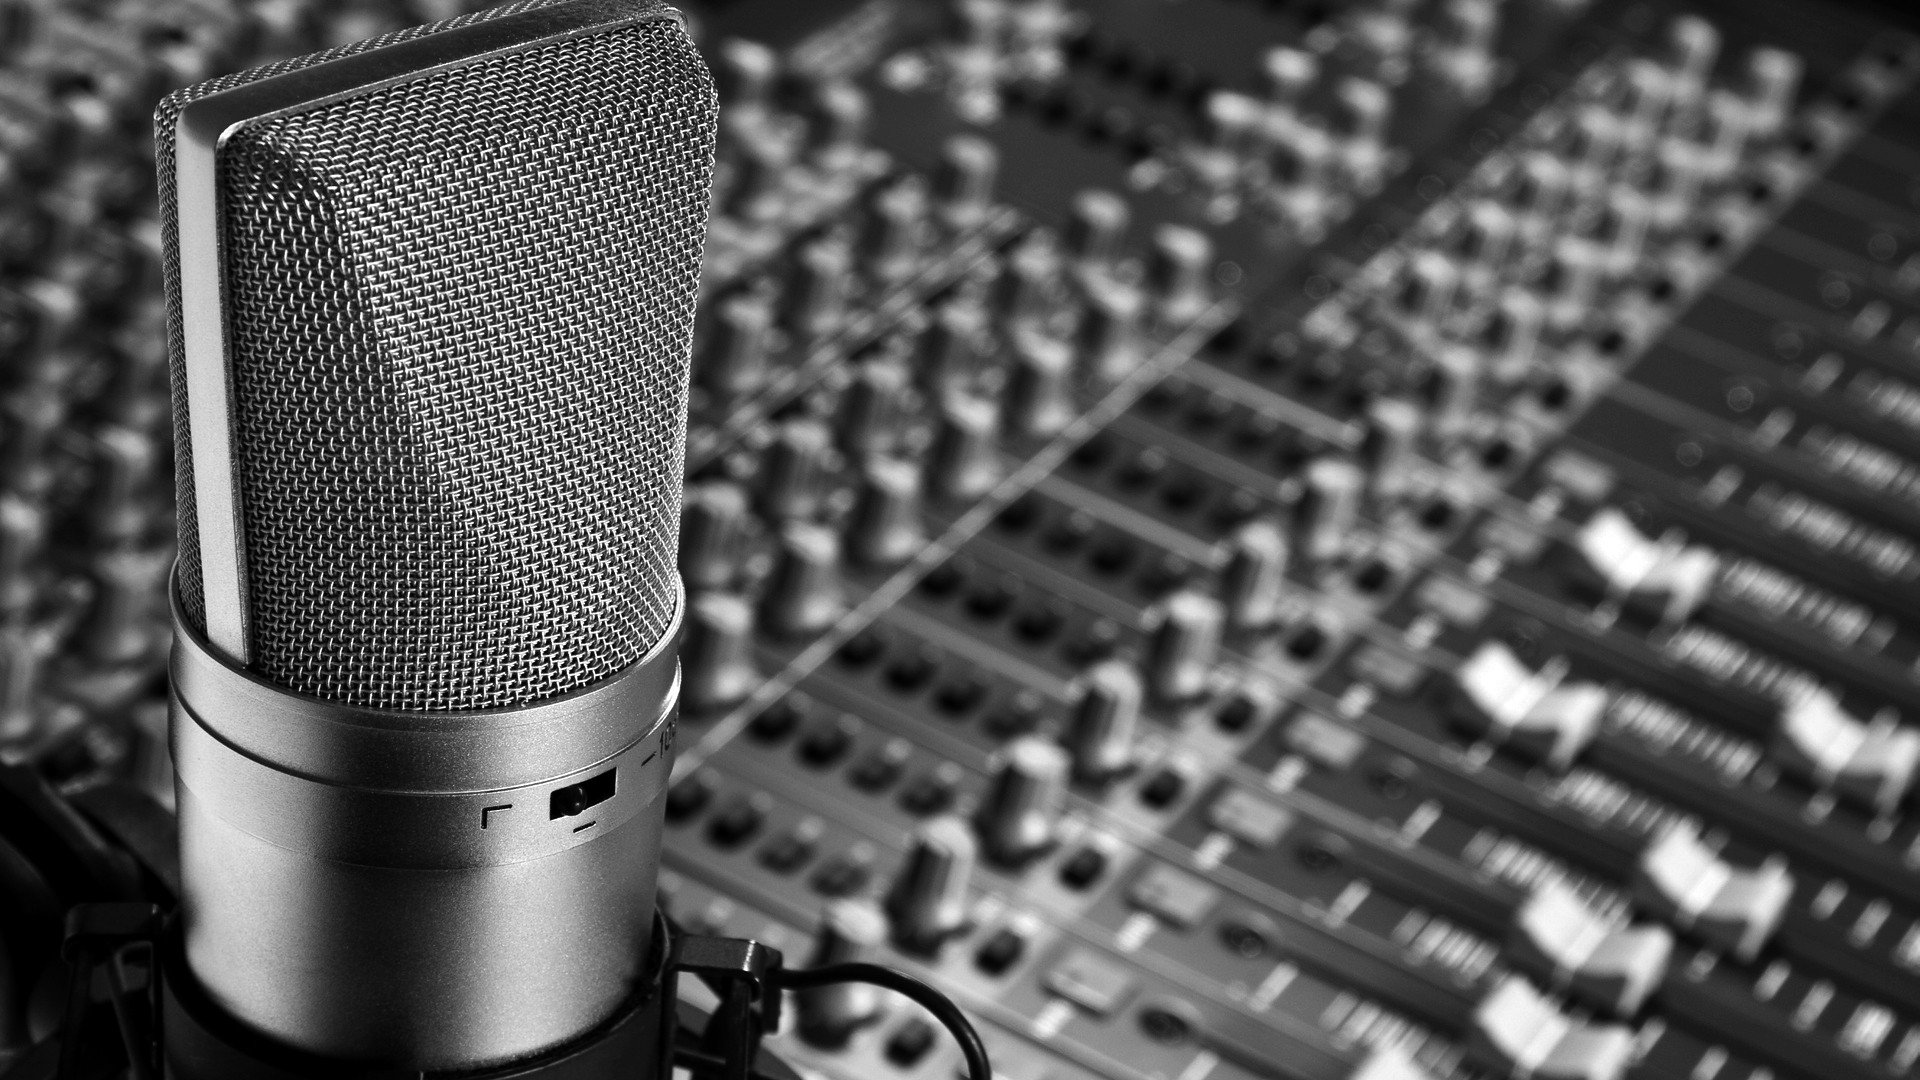 monochrome, Photography, Closeup, Microphones, Mixing consoles, Technology, Music, Depth of field, Buttons Wallpaper